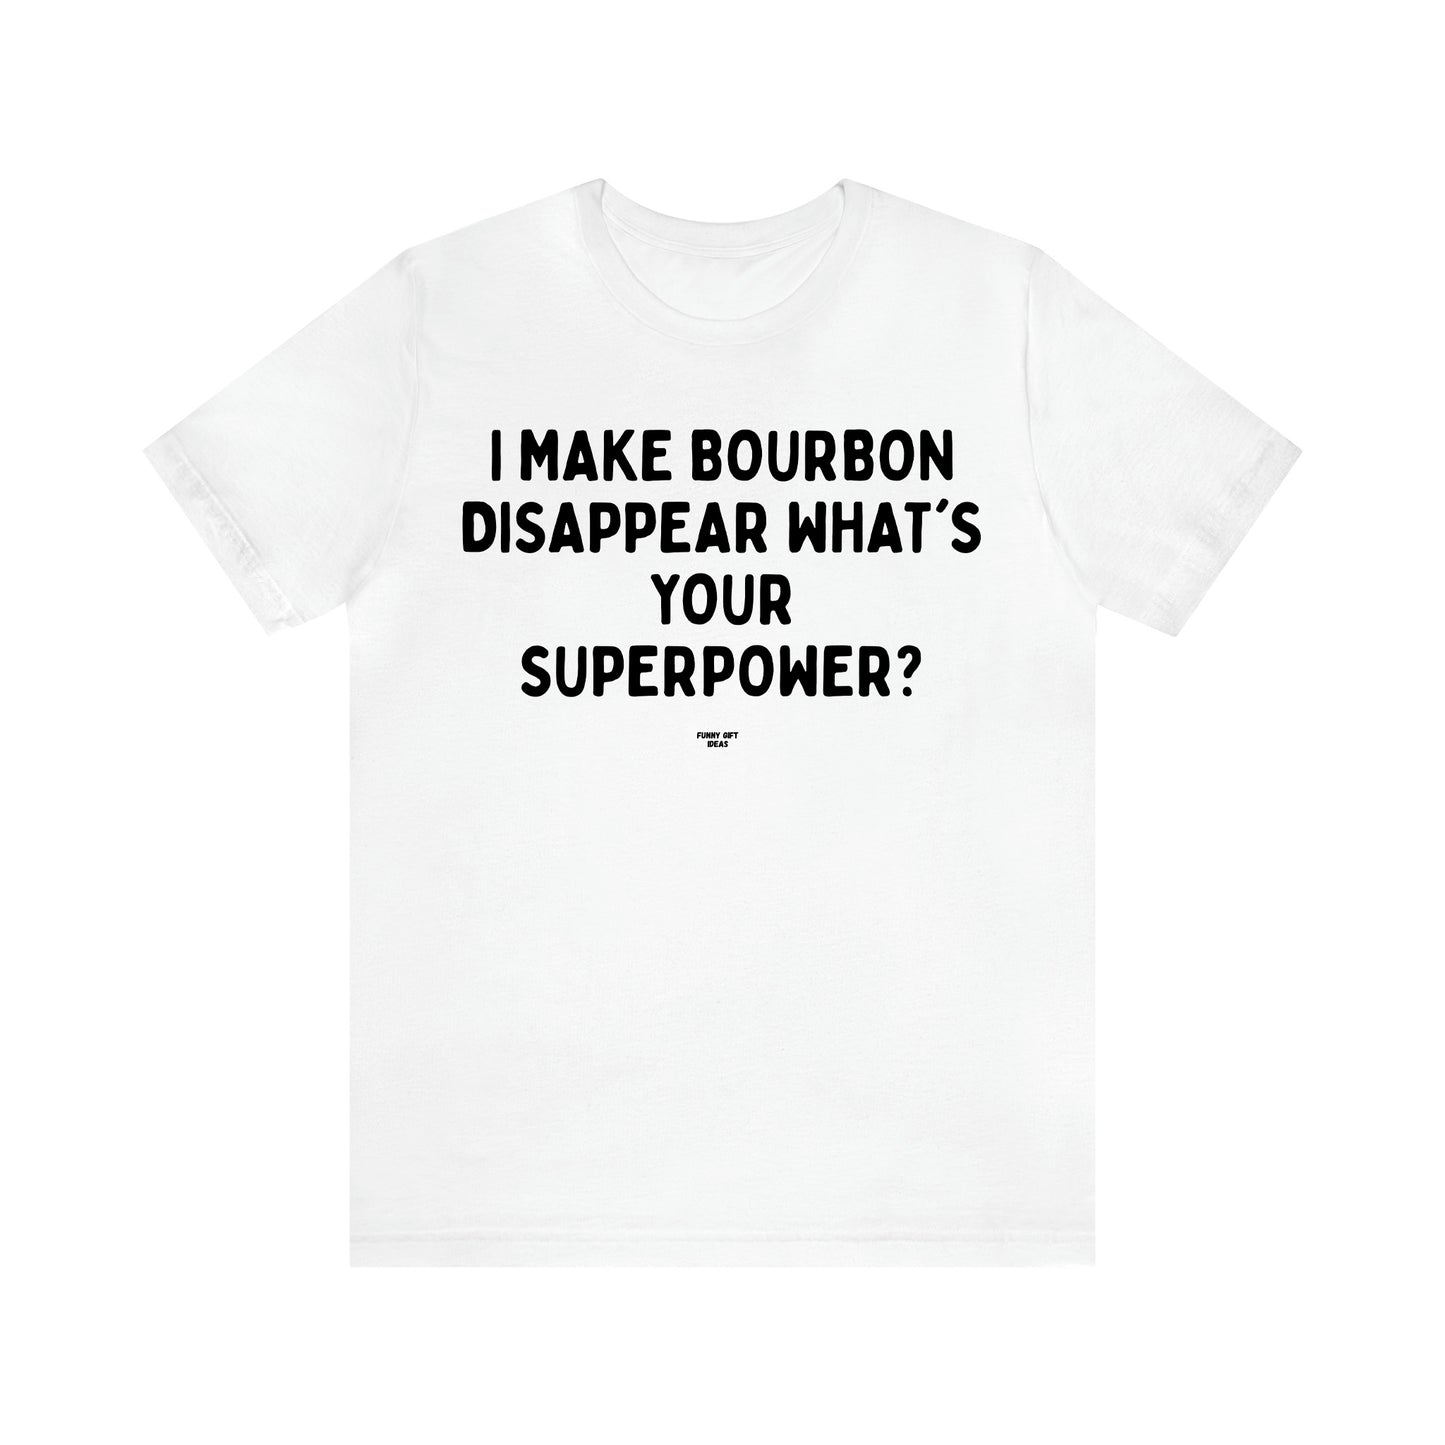 Men's T Shirts I Make Bourbon Disappear What's Your Superpower? - Funny Gift Ideas